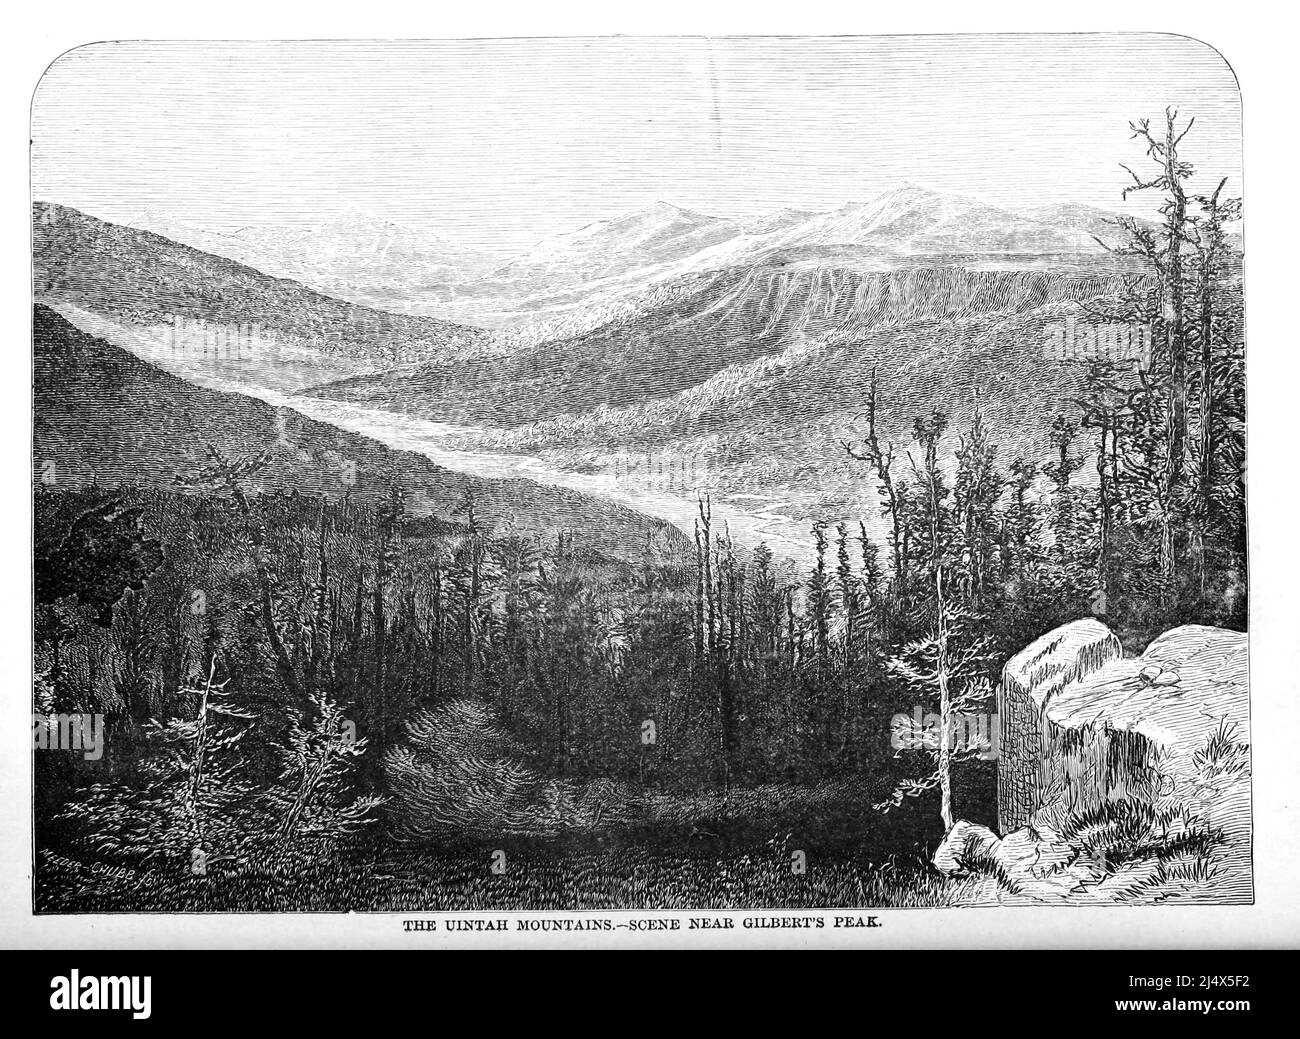 The Uintah Mountains, Scene Near Gilbert's Peak from the book The Pacific tourist : Adams & Bishop's illustrated trans-continental guide of travel, from the Atlantic to the Pacific Ocean : containing full descriptions of railroad routes across the continent, all pleasure resorts and places of most noted scenery in the Far West, also of all cities, towns, villages, U.S. forts, springs, lakes, mountains, routes of summer travel, best localities for hunting, fishing, sporting, and enjoyment, with all needful information for the pleasure traveler, miner, settler, or business man : a complete trave Stock Photo